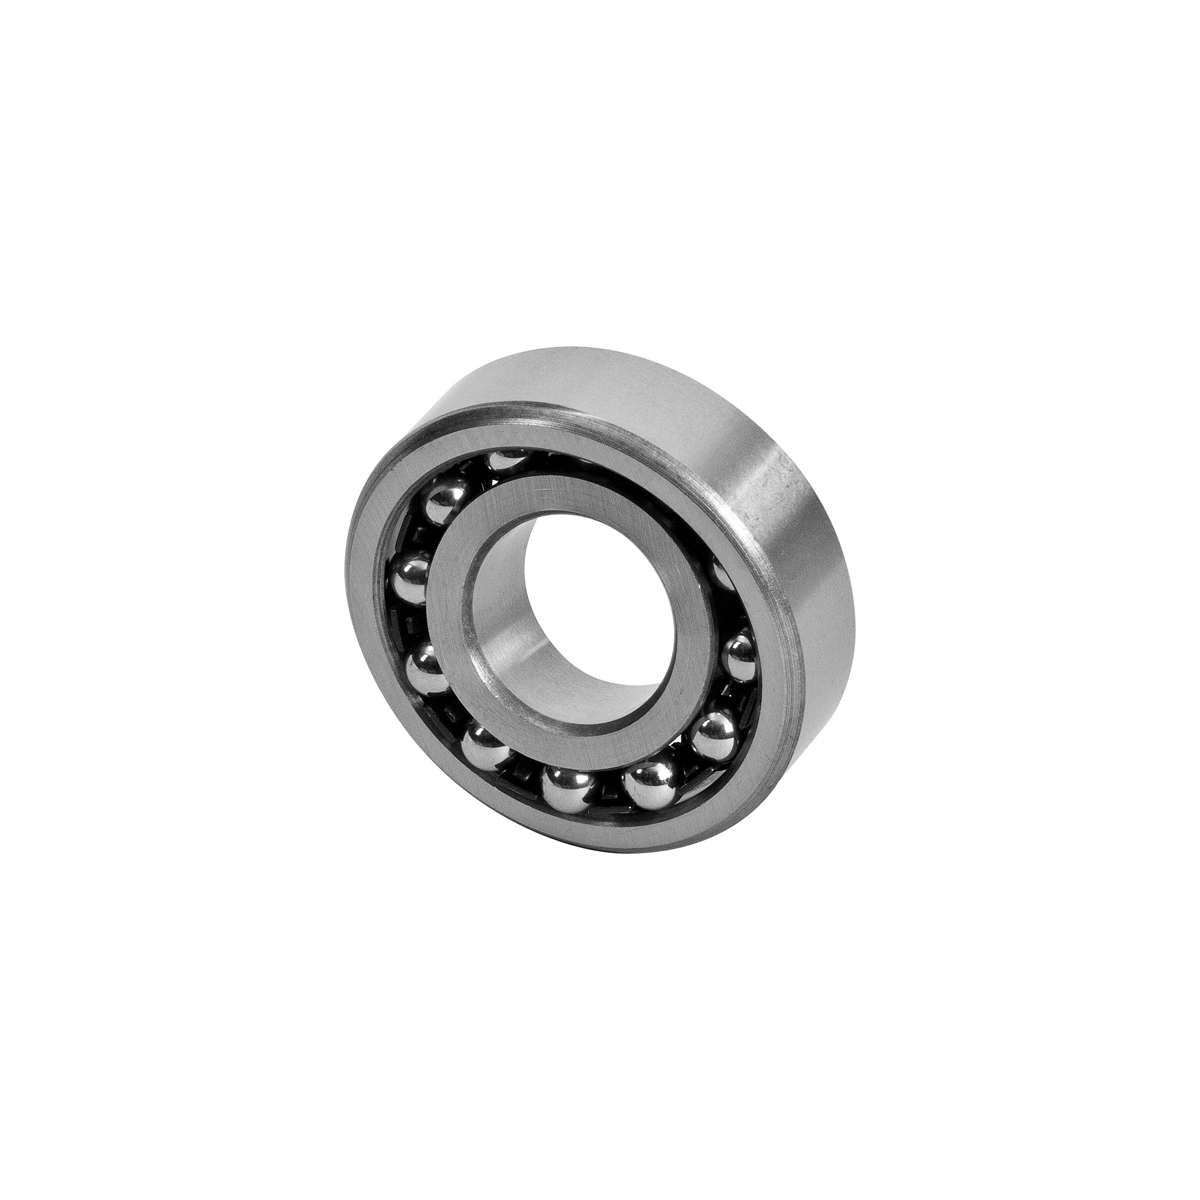 Bearing Worm Shaft Lower for Hobart Mixers OEM # BB-12-7